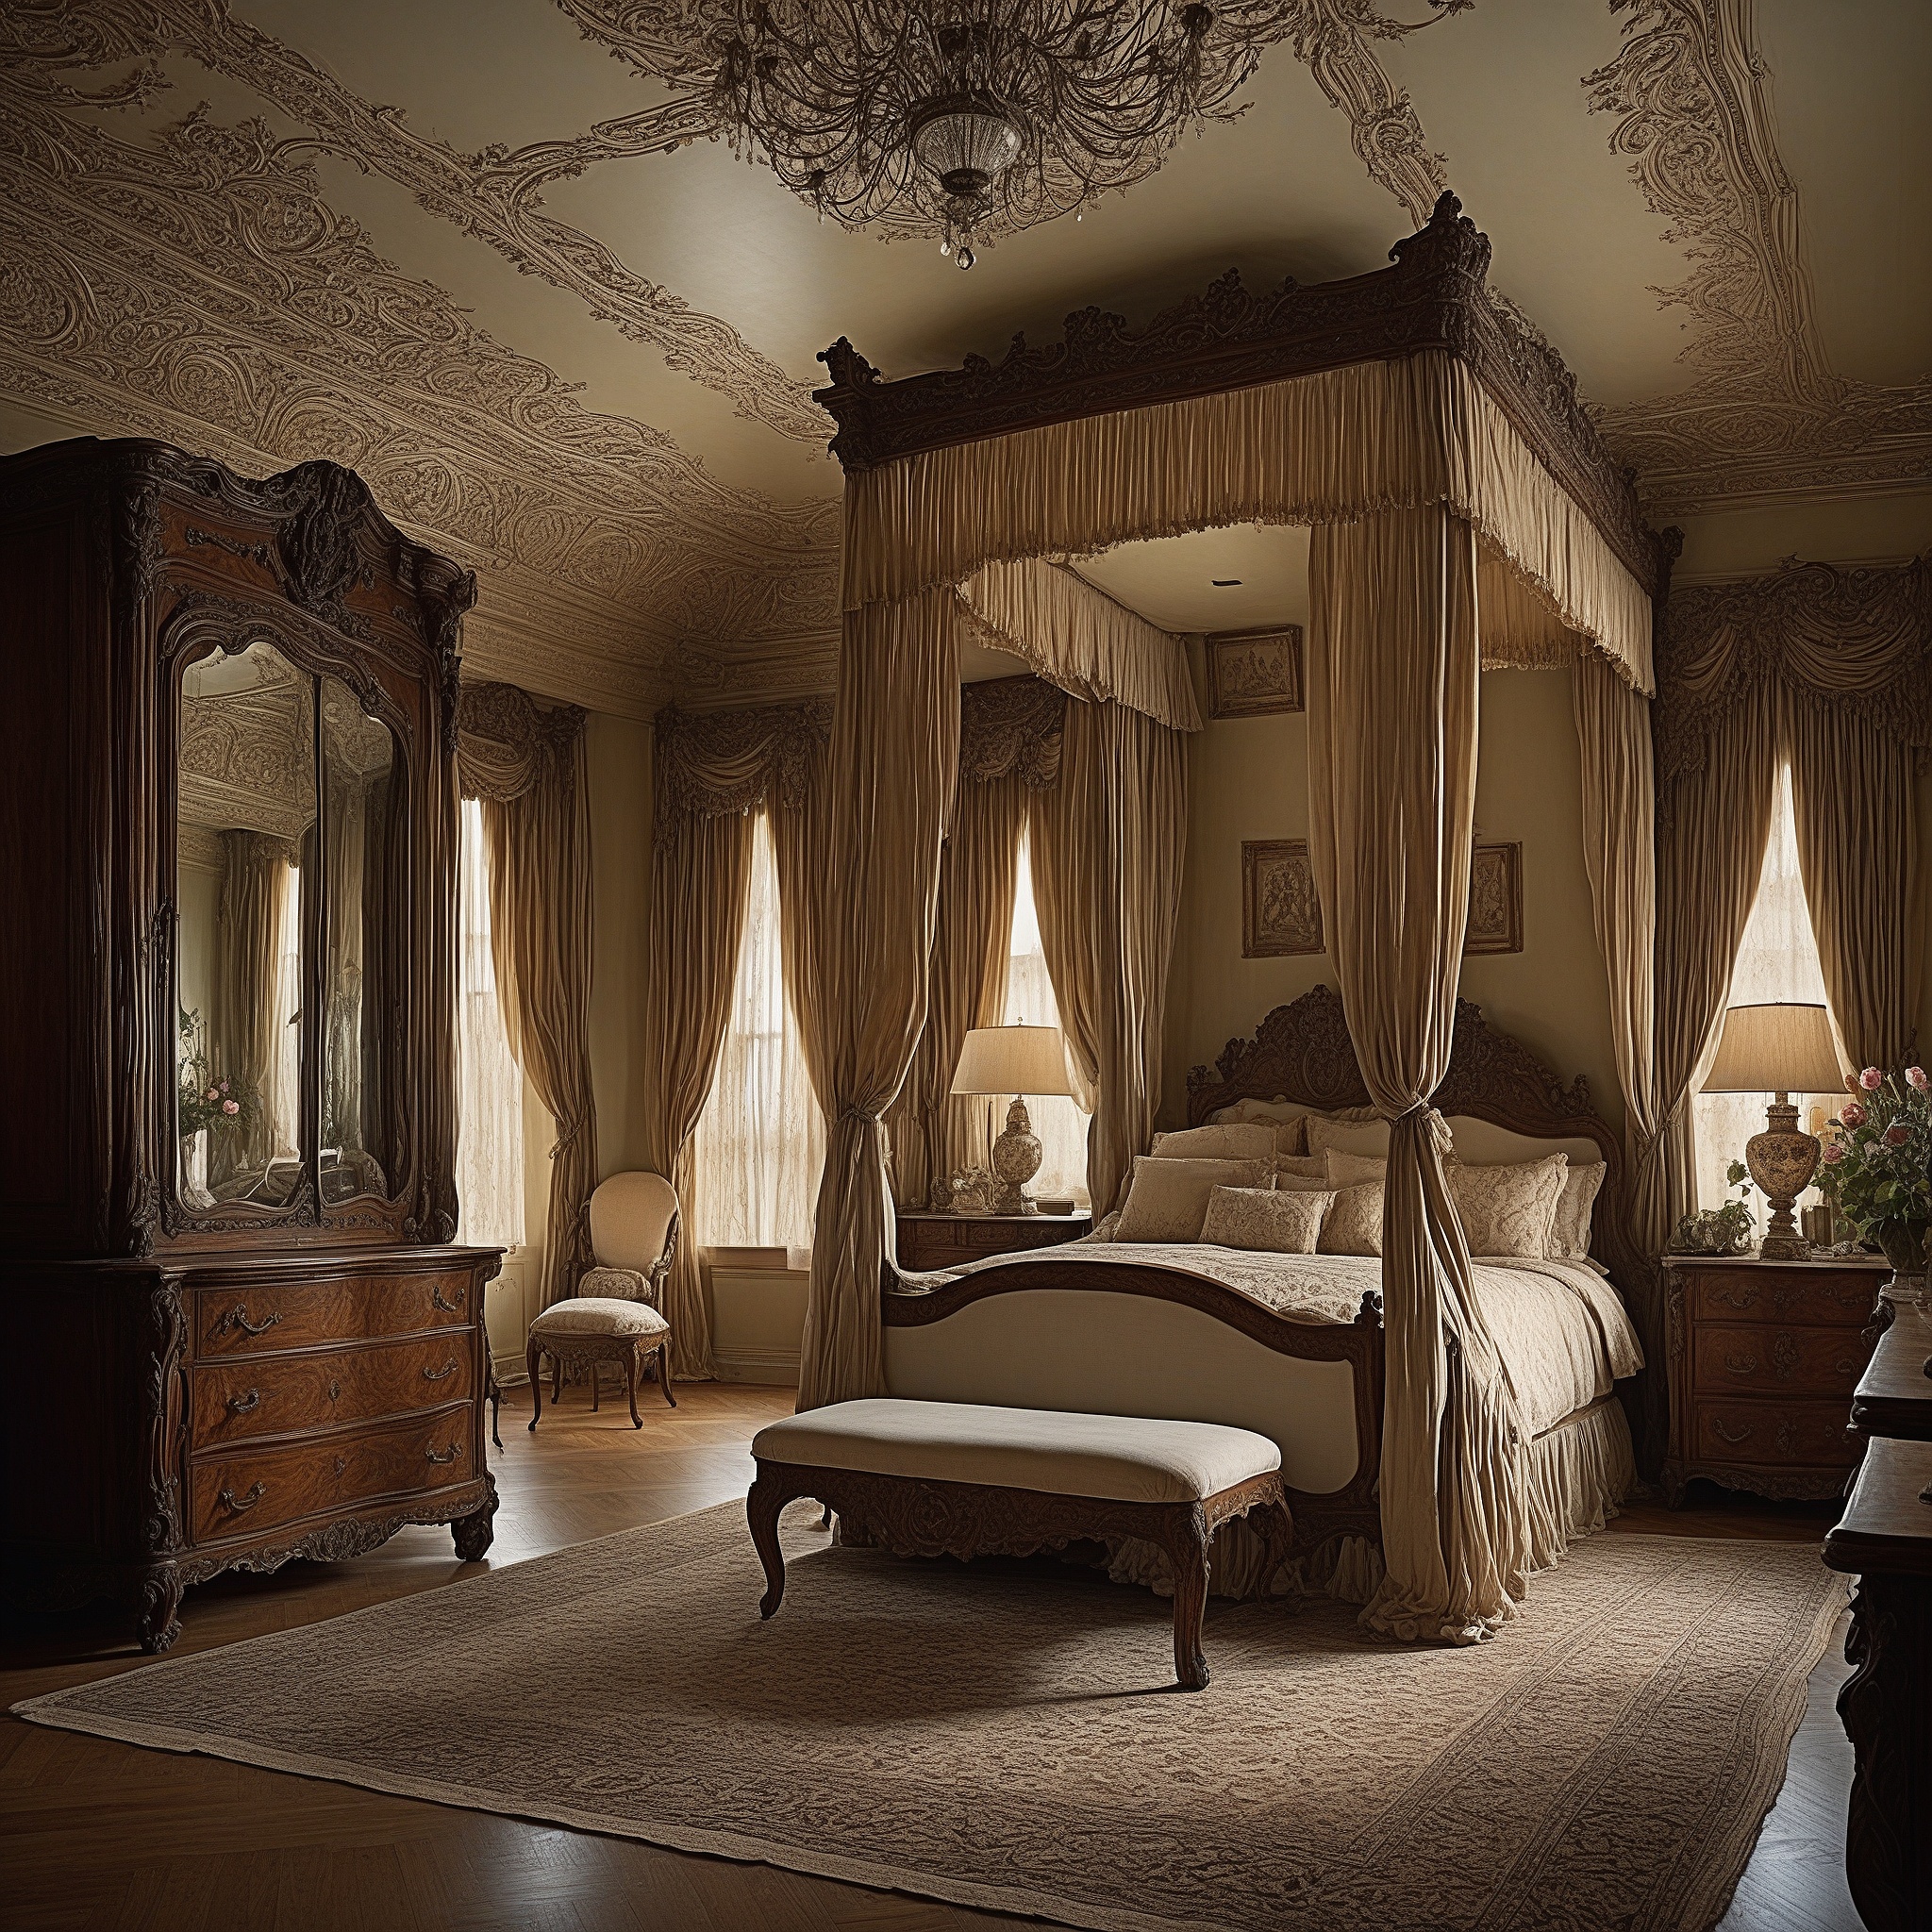 Victorian Master Bedroom With Ornate Furniture, Canopy Bed, Antique Decor